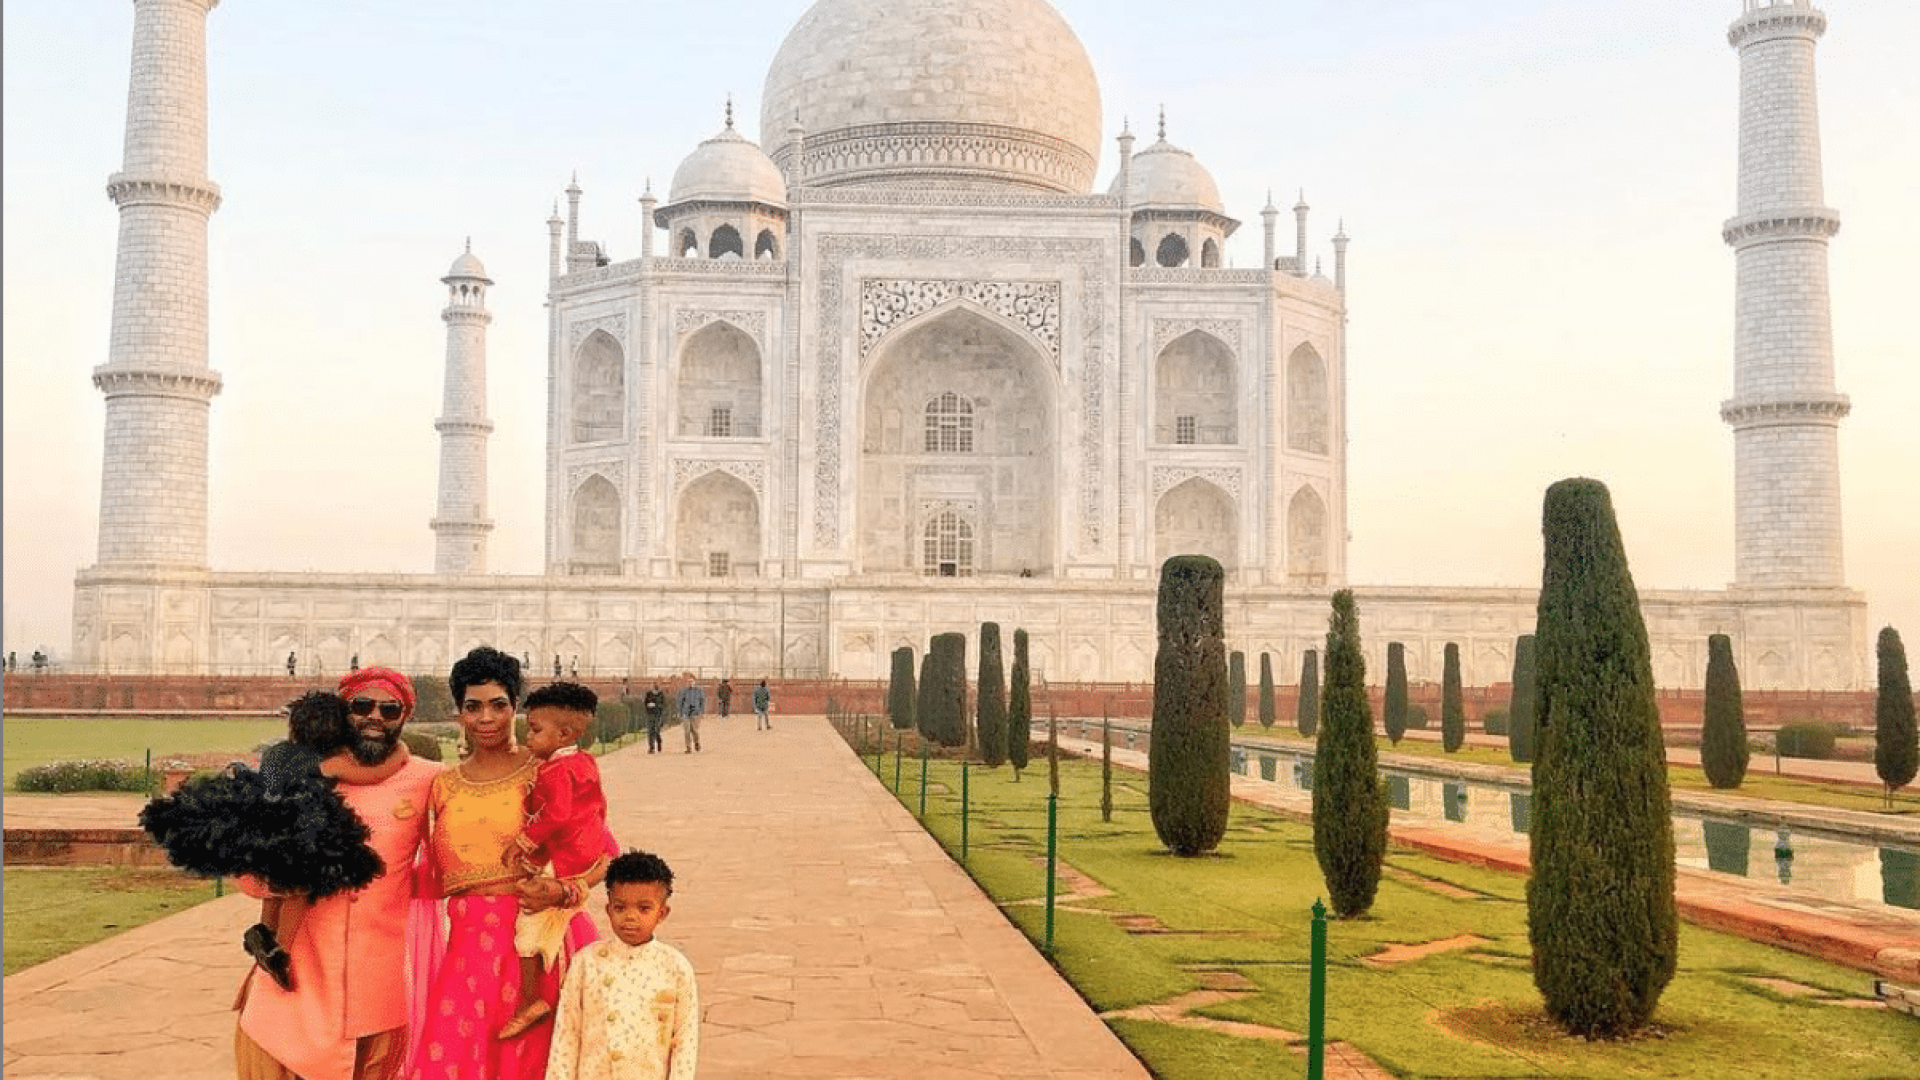 Black Travel Moment of the Day: We Love This Sweet Family Photo Opp At The Taj Mahal